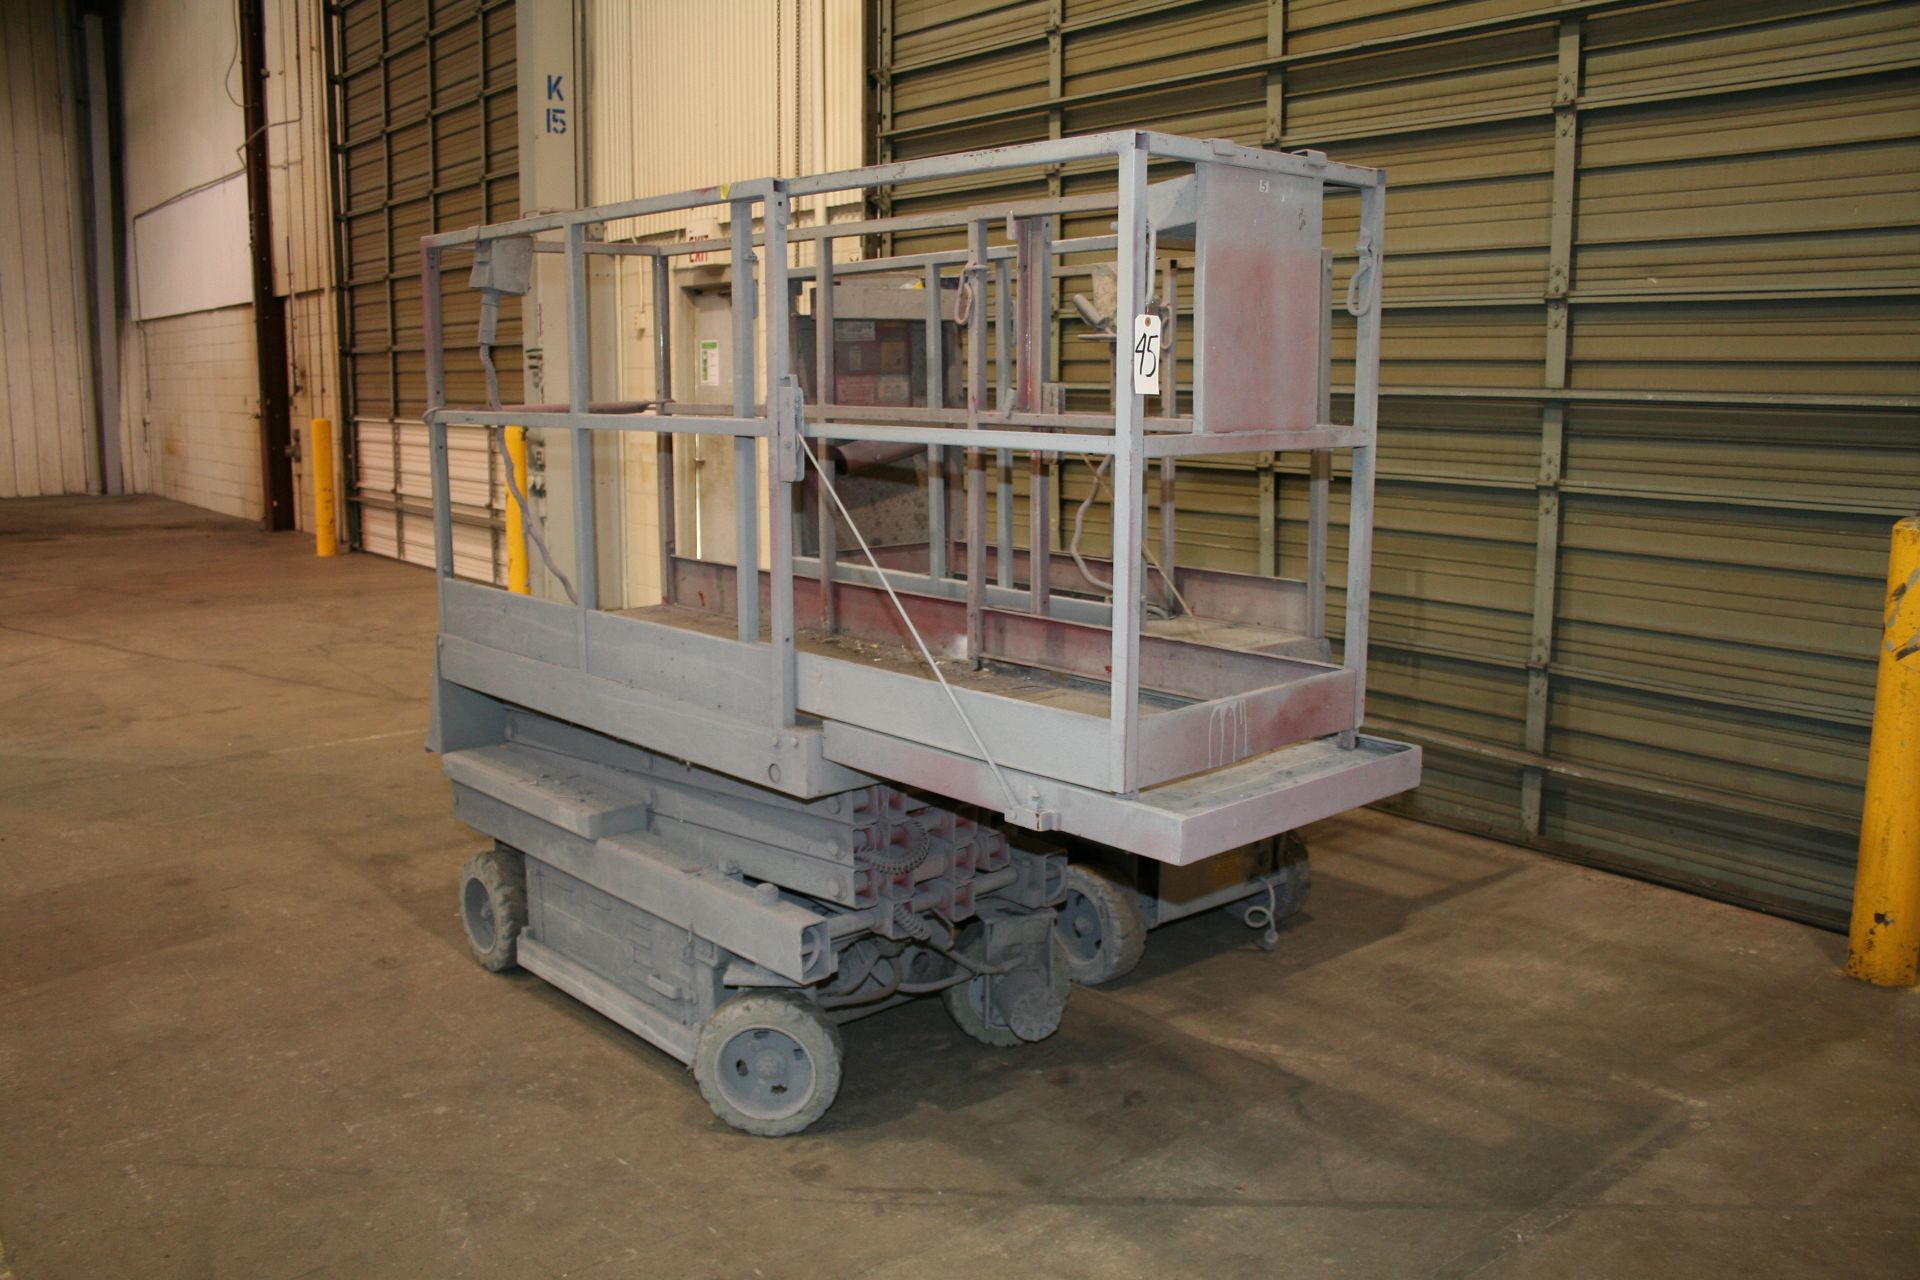 Scissor Lift, Maryville Engr. Co., No Plate